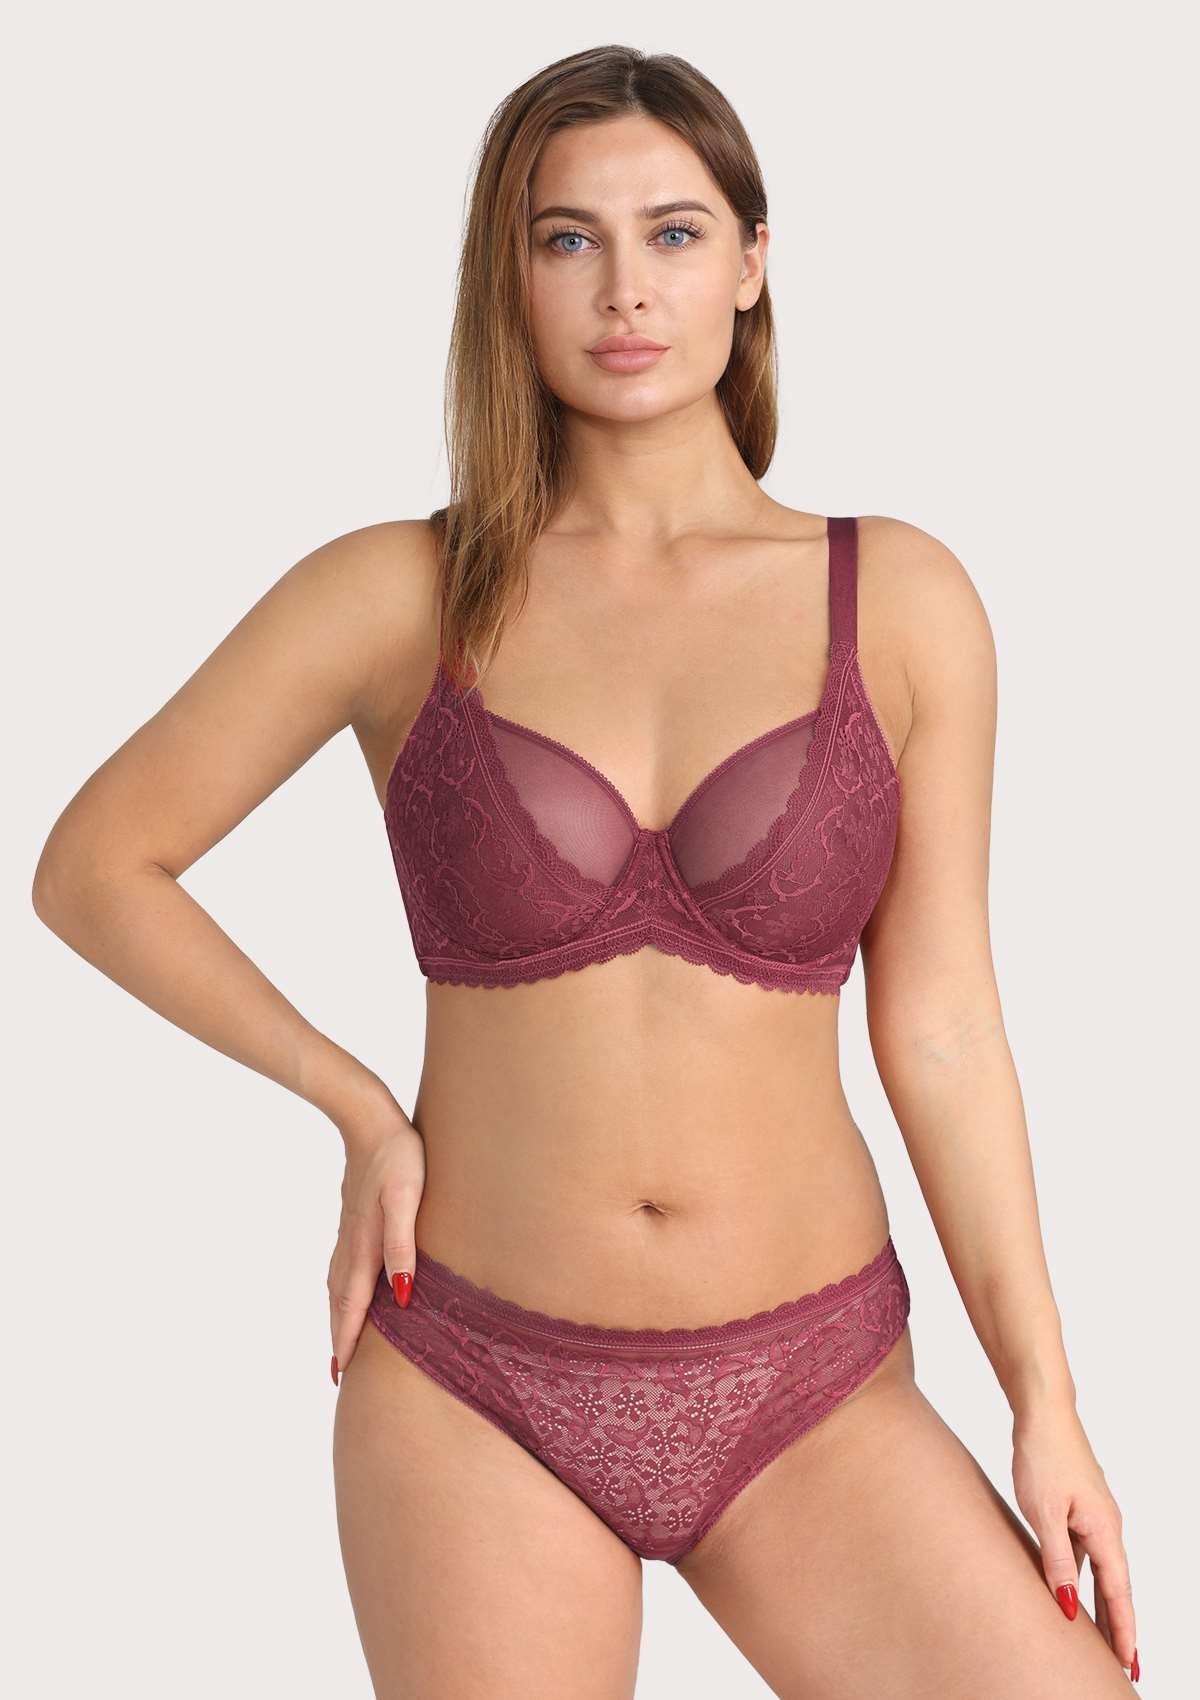 HSIA Anemone Big Bra: Best Bra For Lift And Support, Floral Bra - Burgundy / 40 / D